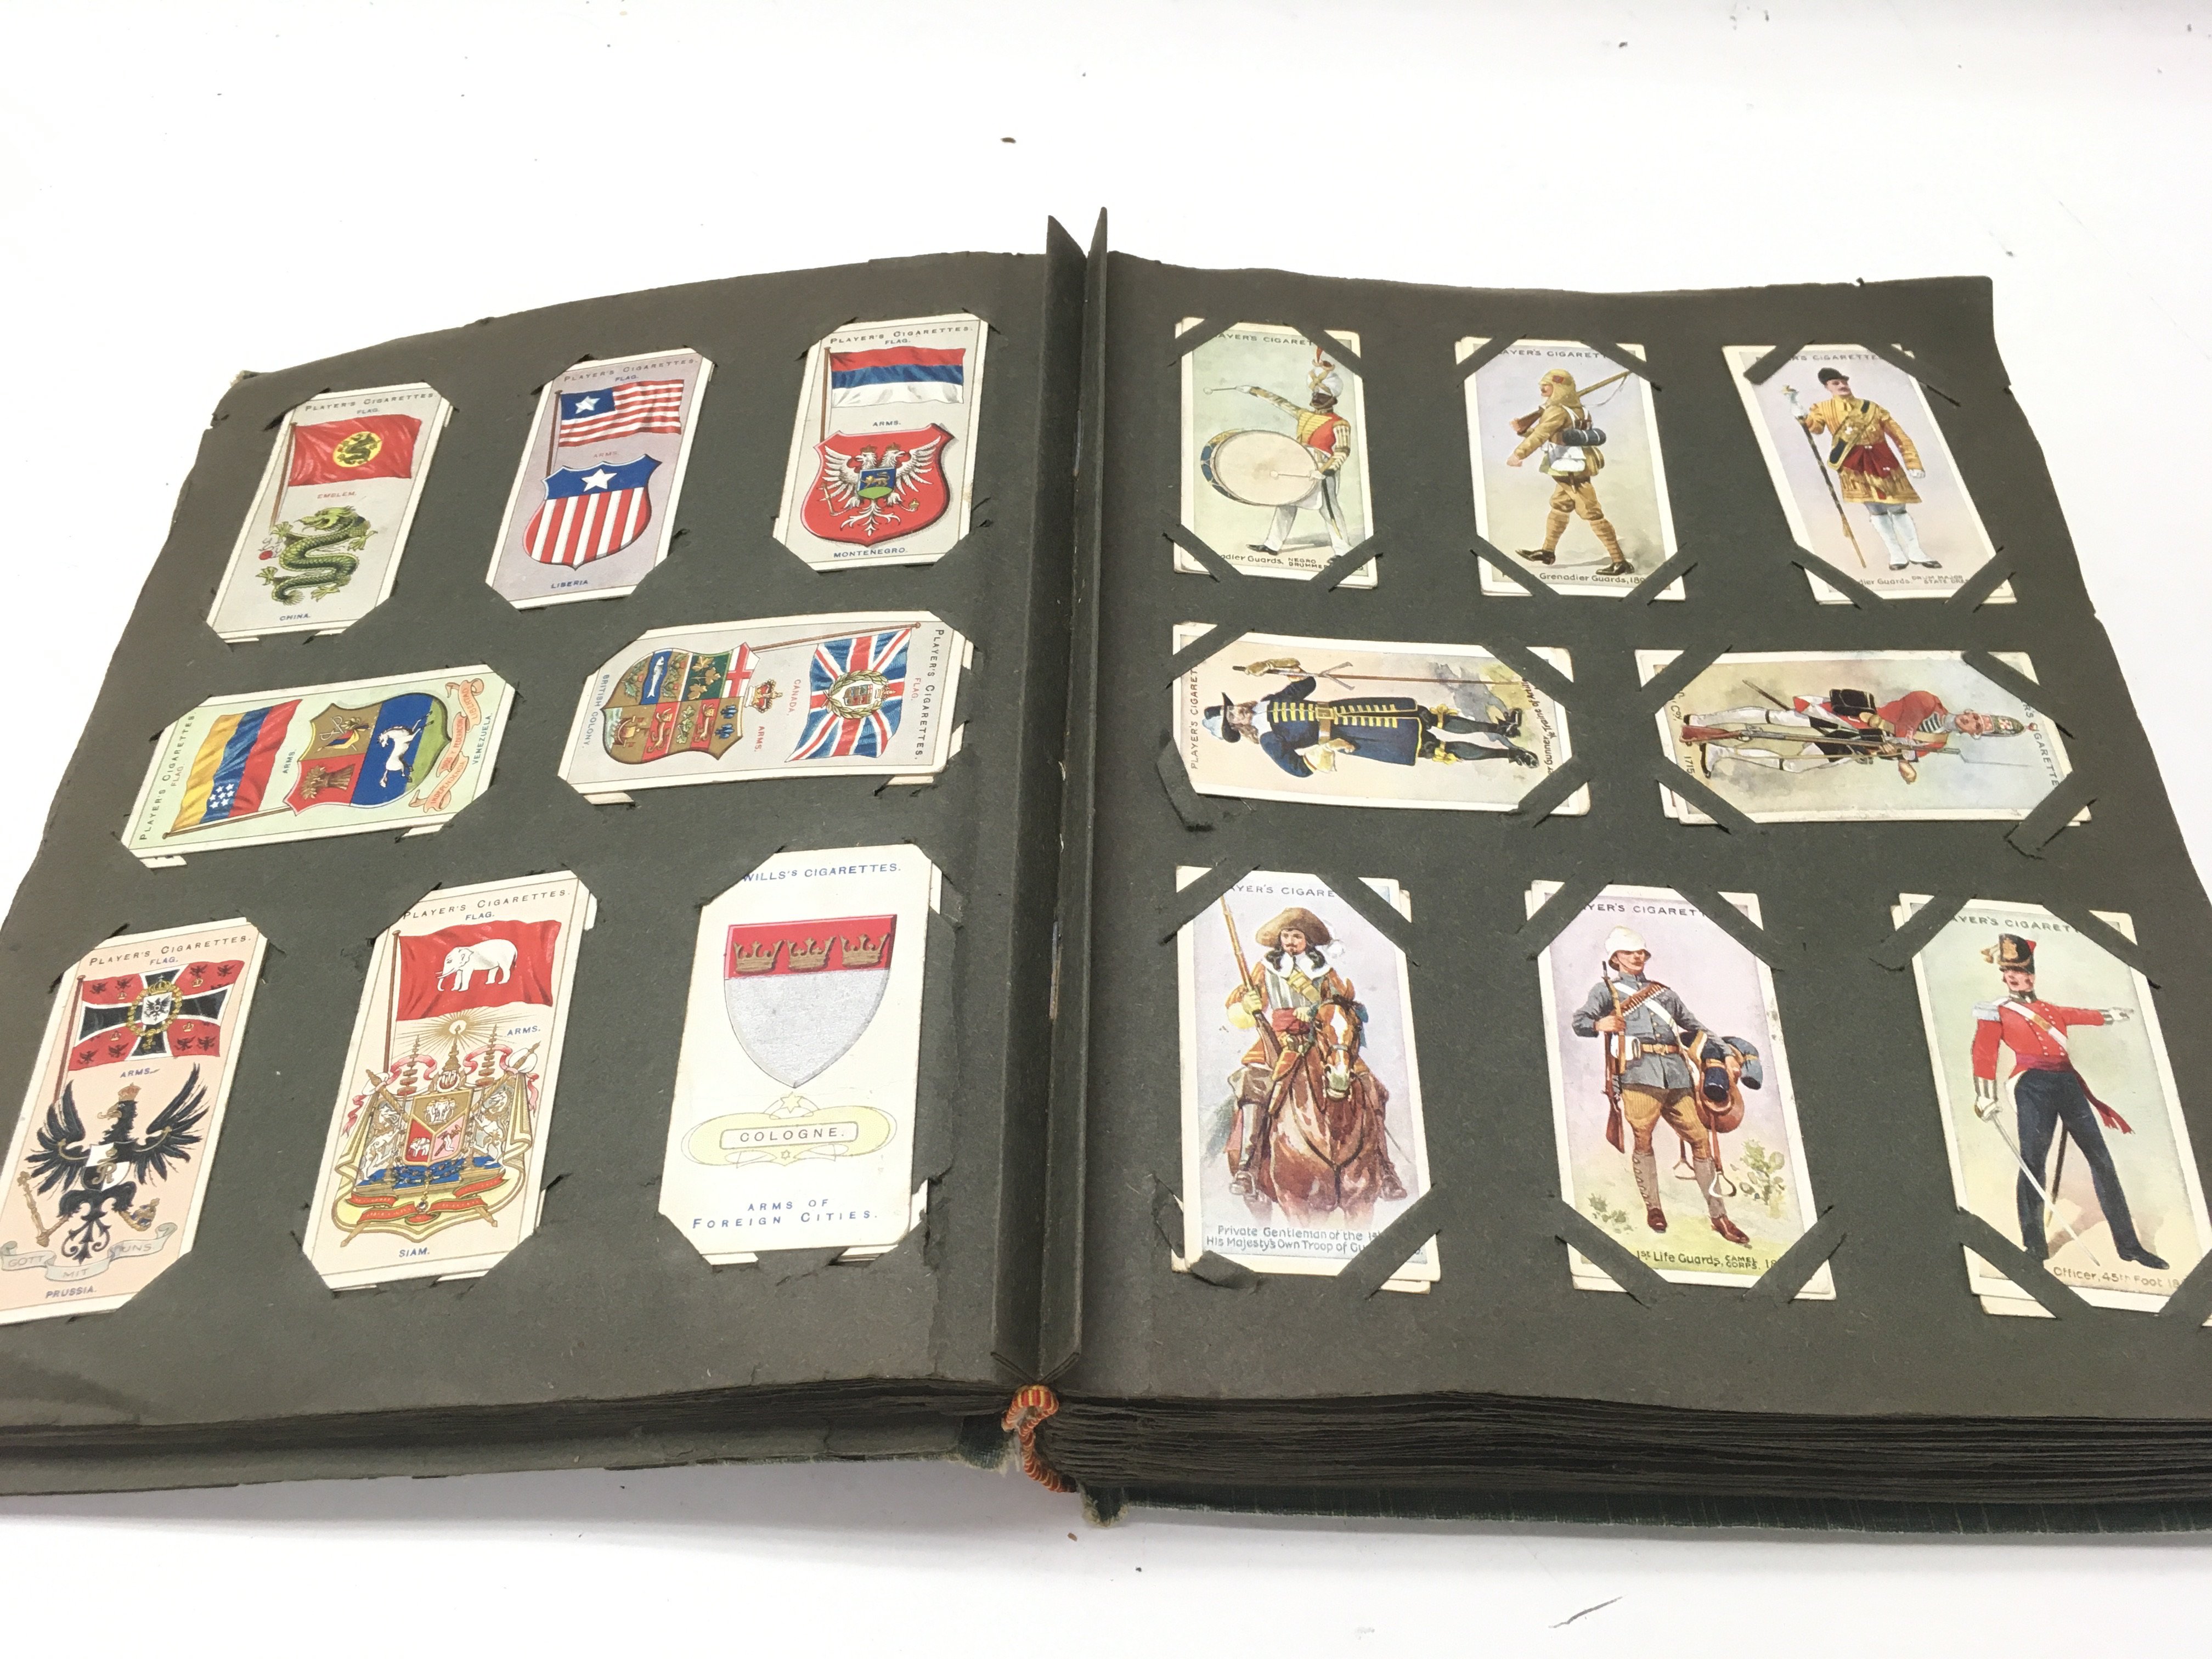 An album containing a large number of vintage cigarette cards. - Image 8 of 12